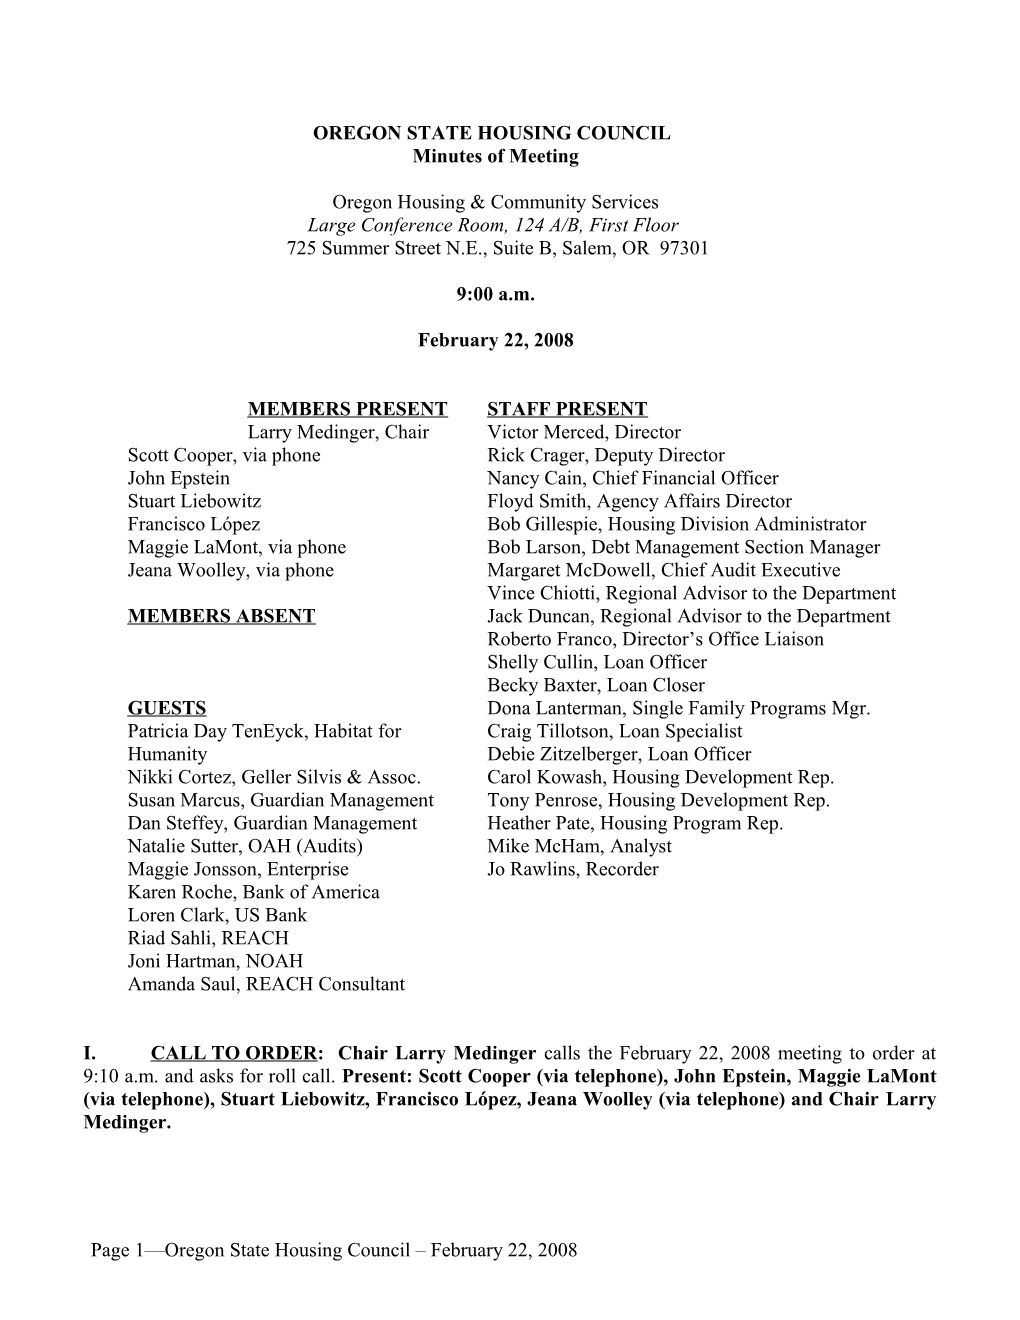 02-22-2008 State Housing Council Meeting Minutes